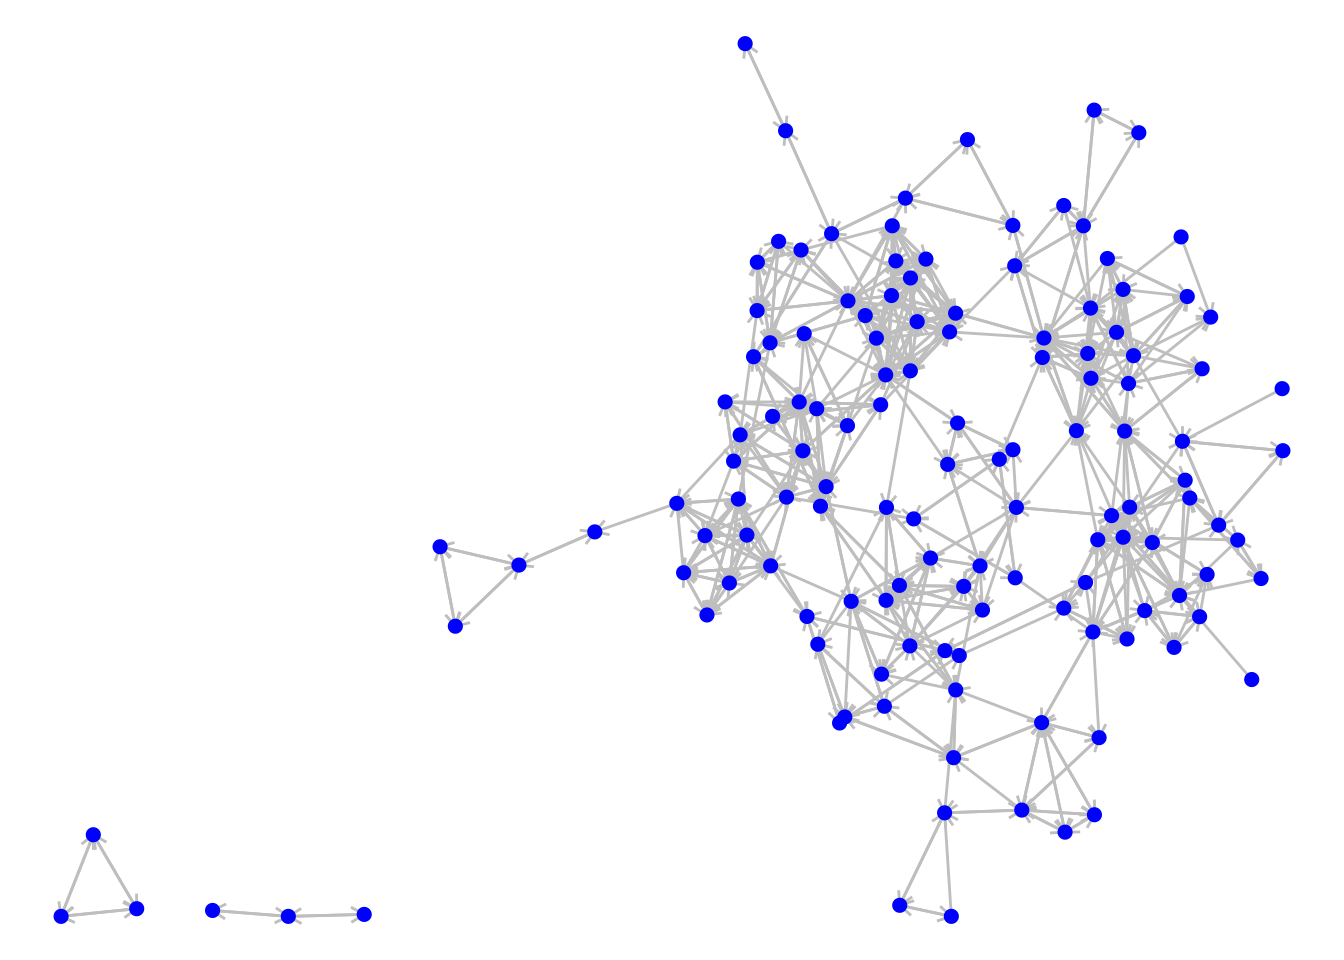 The directed graph of reported friendships from our French high school